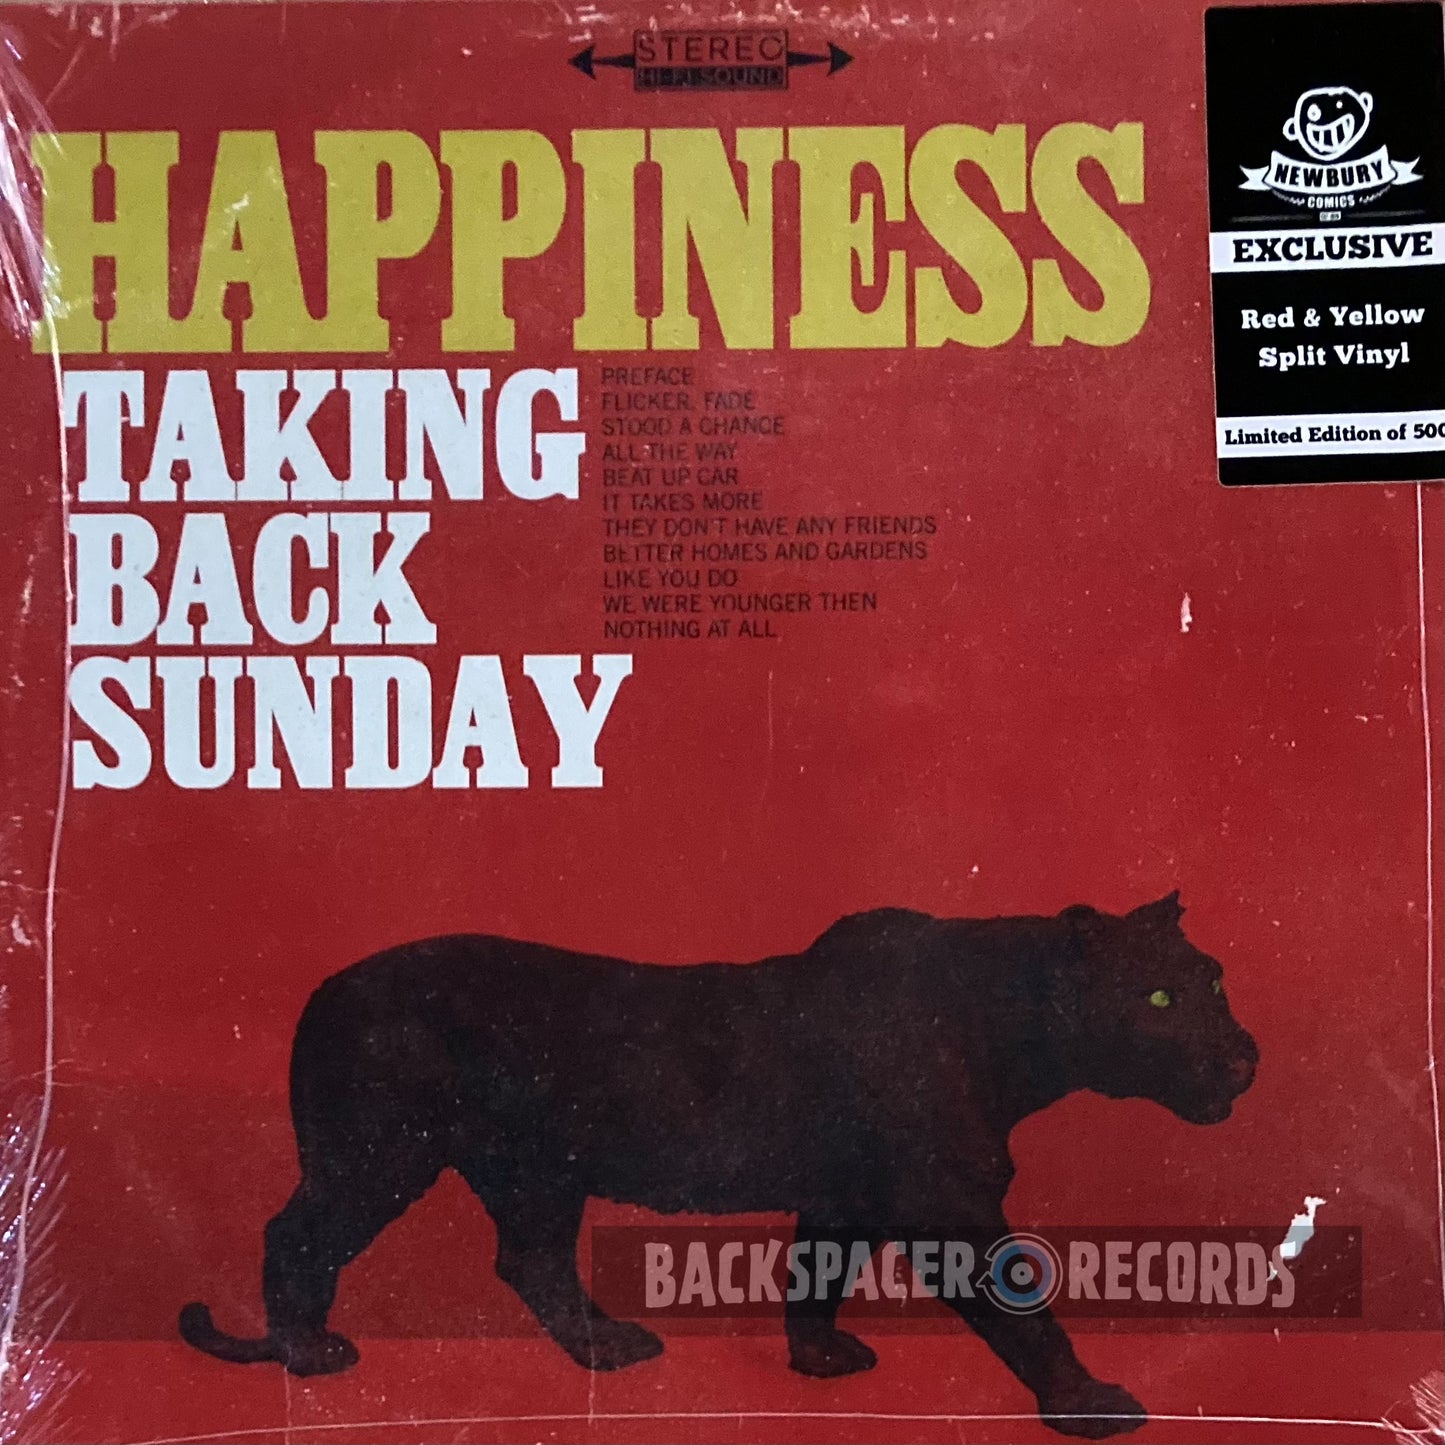 Taking Back Sunday - Happiness Is (Limited Edition) LP (Sealed)